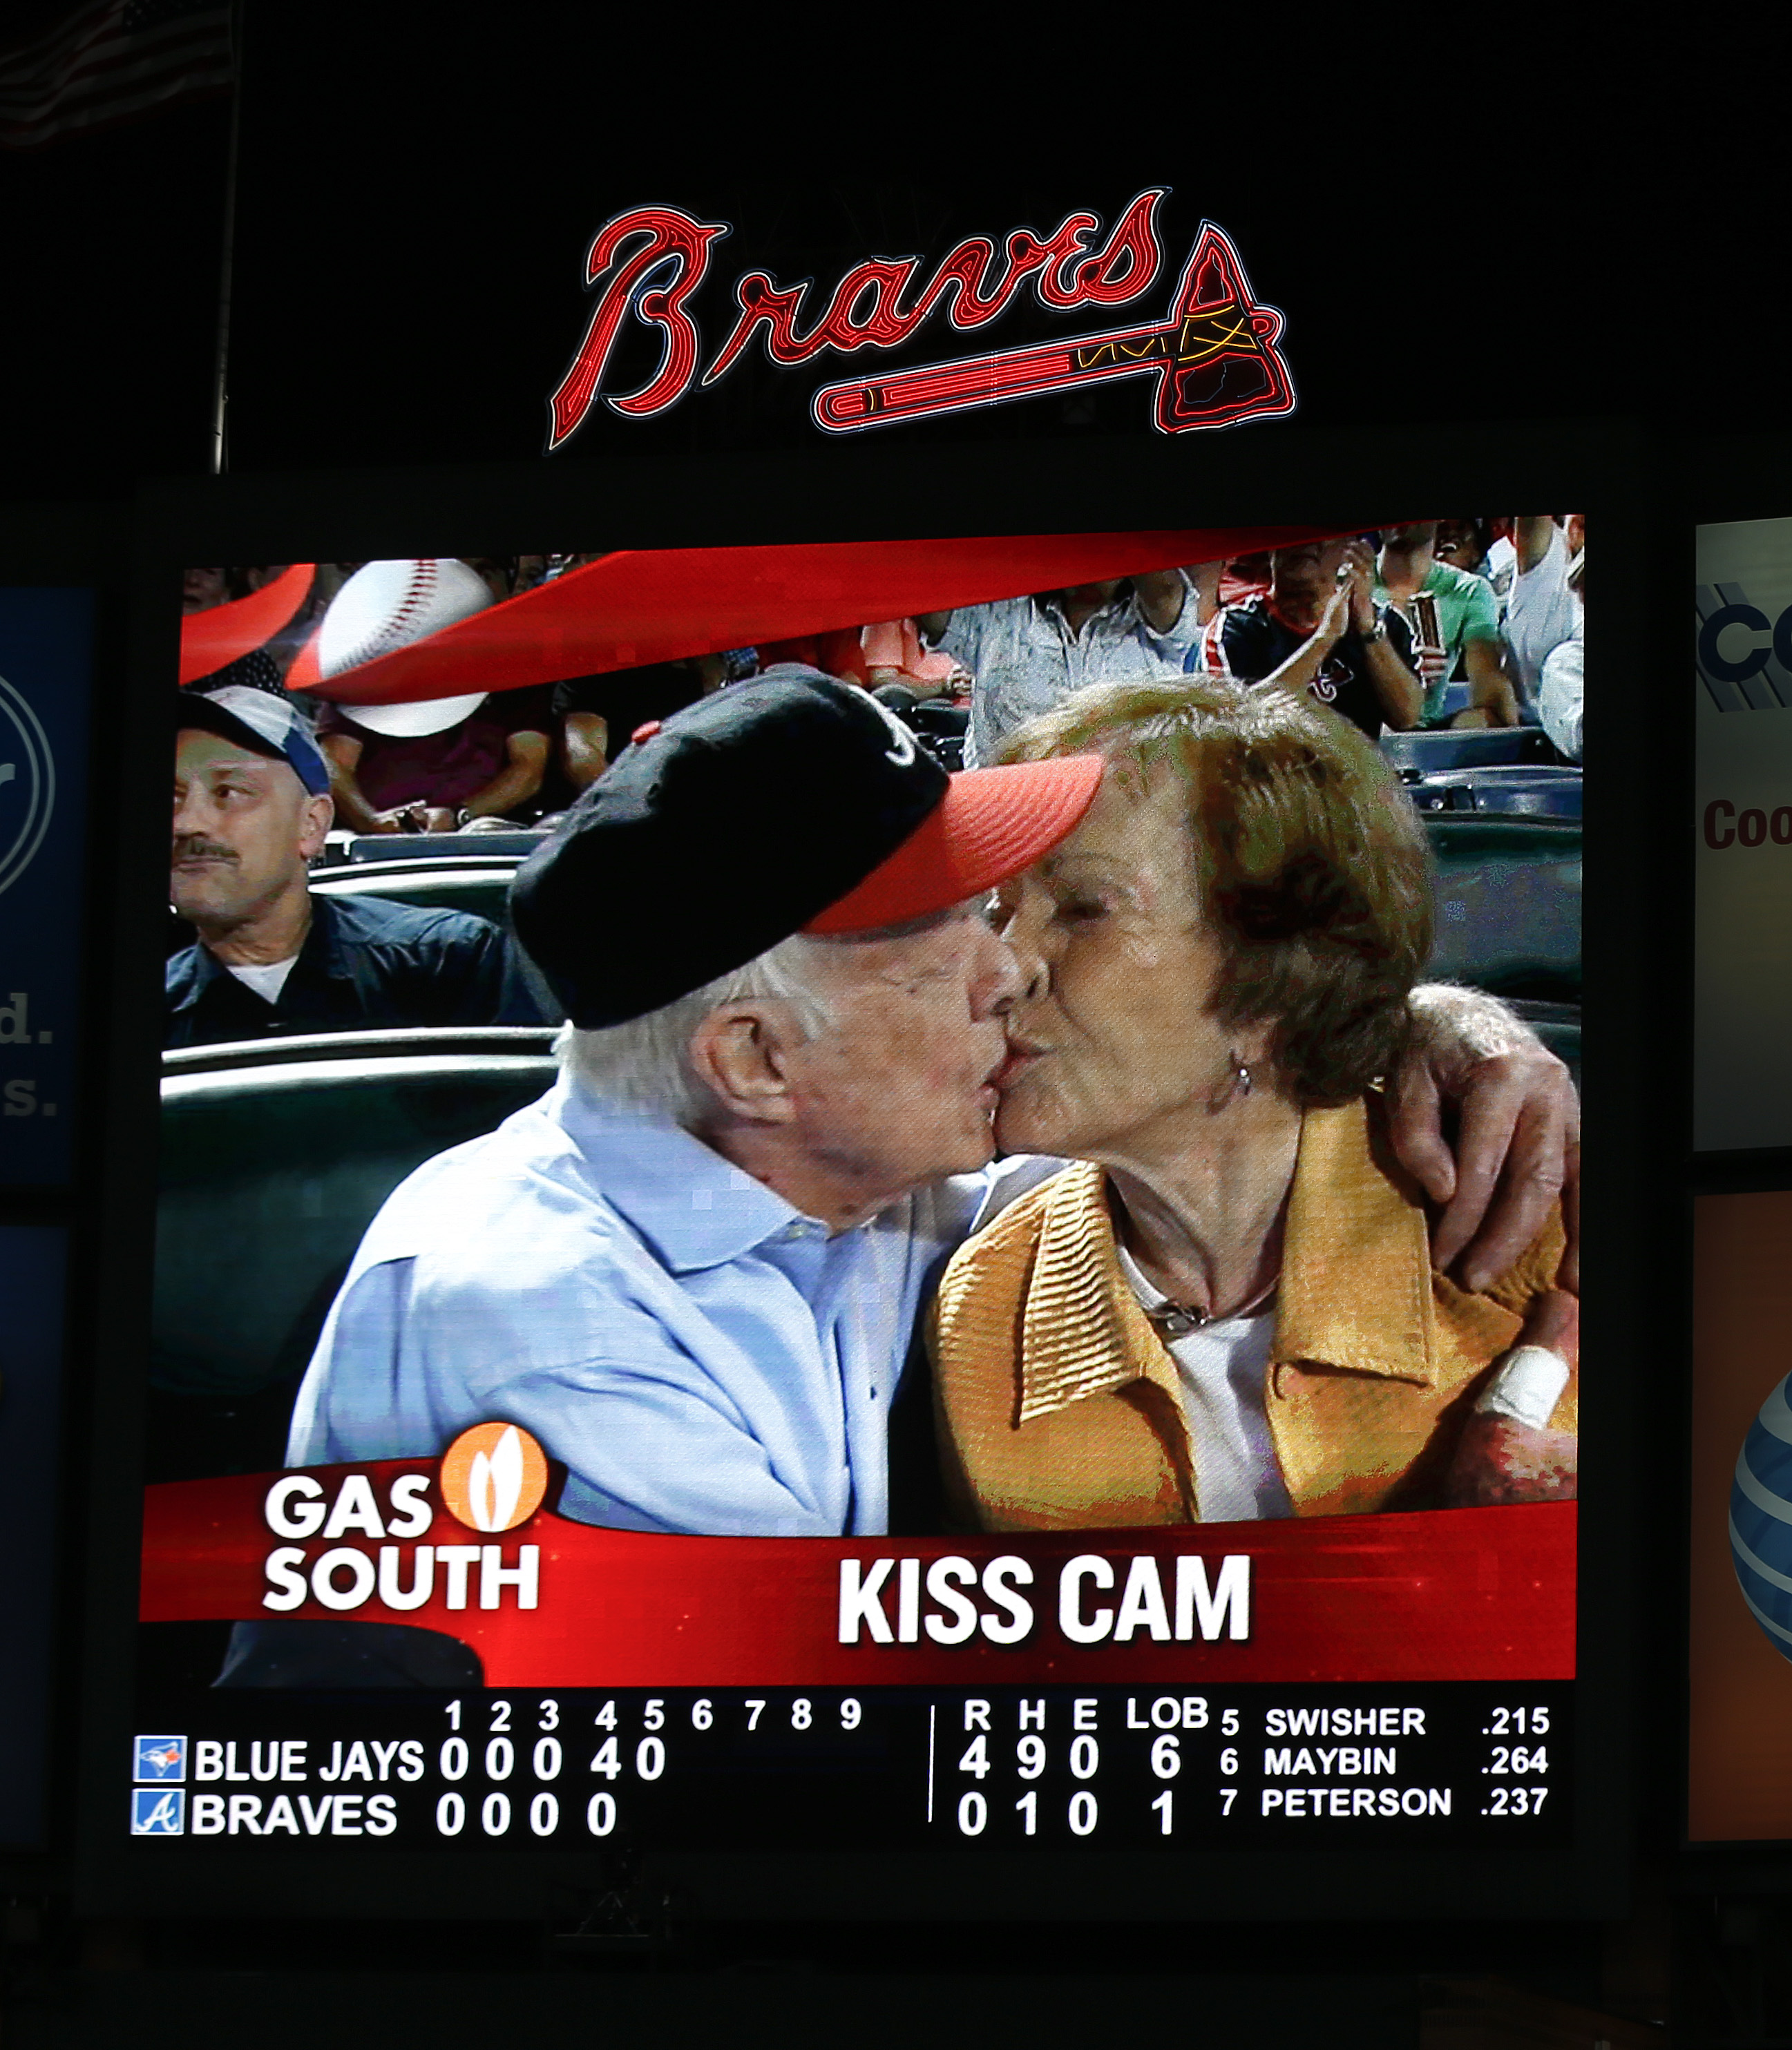 Jimmy Carter kisses his wife, Rosalynn, on the "Kiss Cam" during a baseball game between the Atlanta Braves and the Toronto Blue Jays in Atlanta on Sept. 17, 2015.